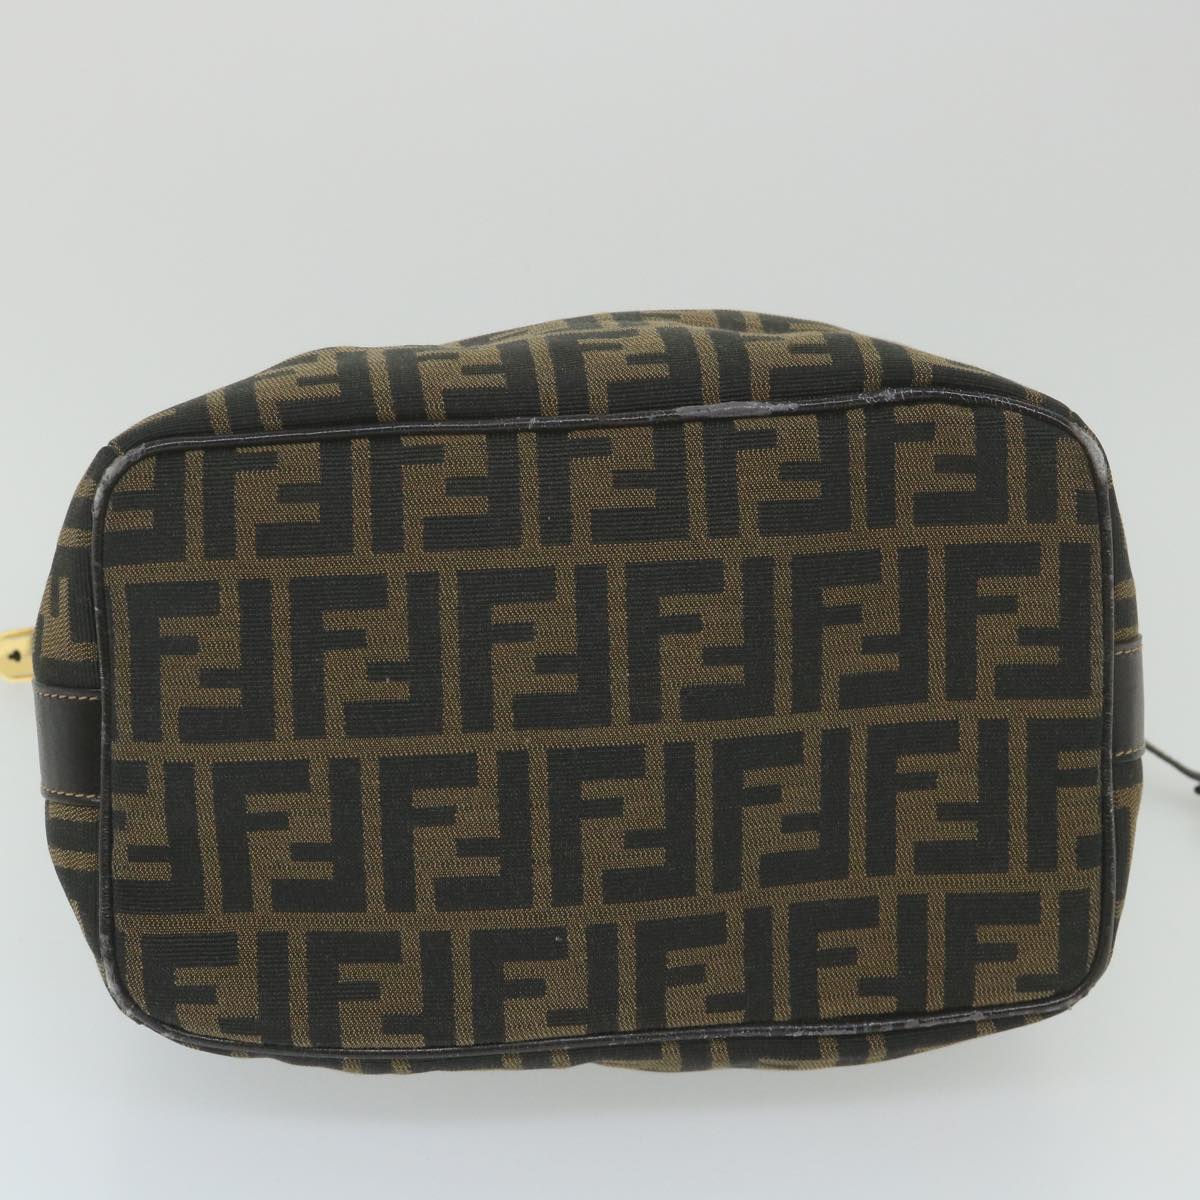 FENDI Zucca Canvas Vanity Cosmetic Pouch Black Brown Auth 59688